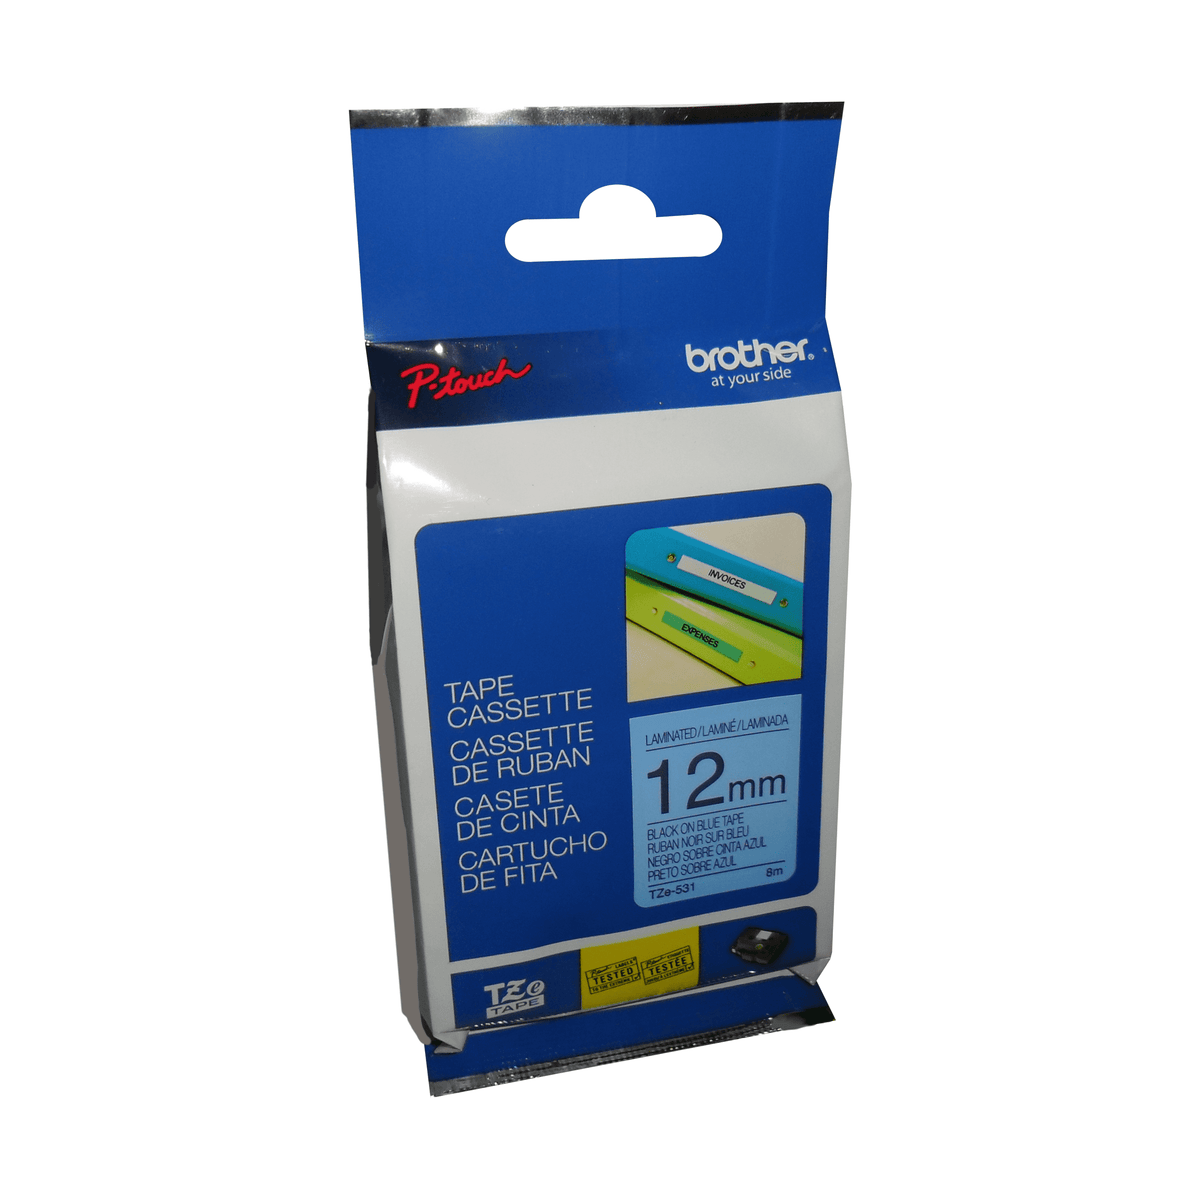 Brother Genuine TZe531 Black on Blue Laminated Tape for P-touch Label Makers, 12 mm wide x 8 m long